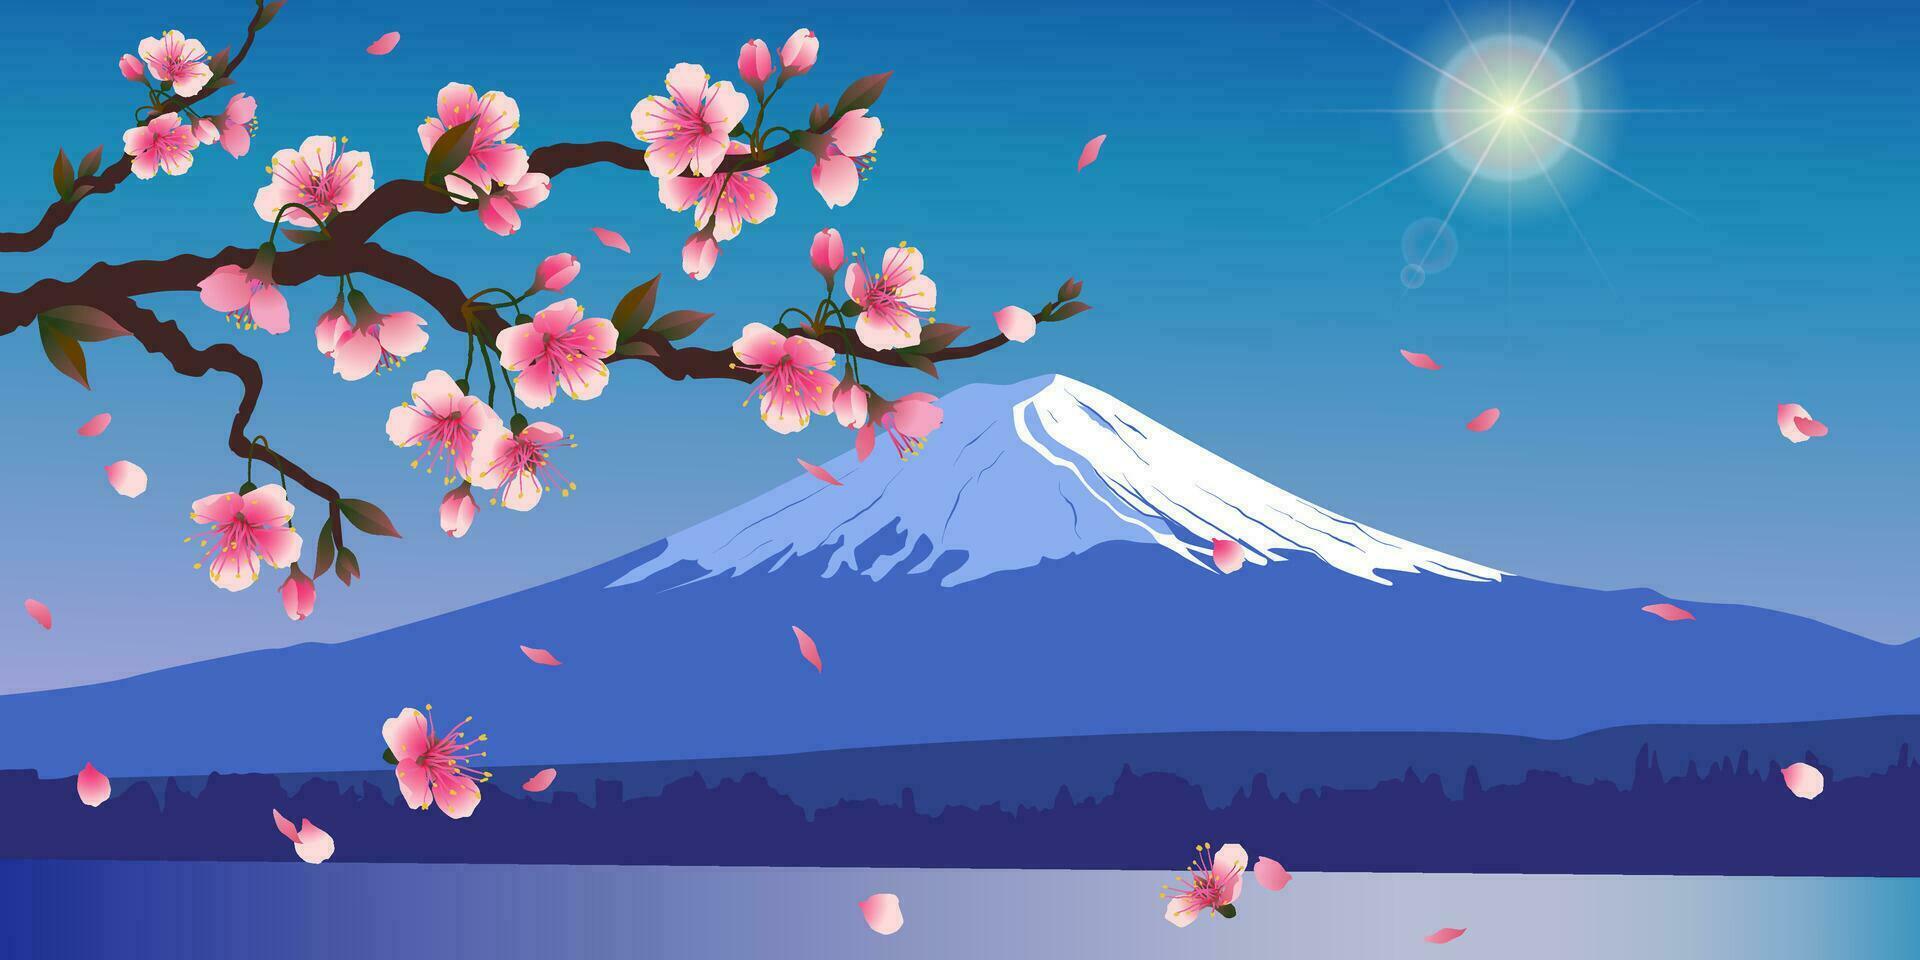 Japanese Nightingale on a branch of cherry blossoms. Hanami in Japan. Pink Sakura and Uguisu. Songbird symbol of spring and love isolated on a white background. Vector illustration.